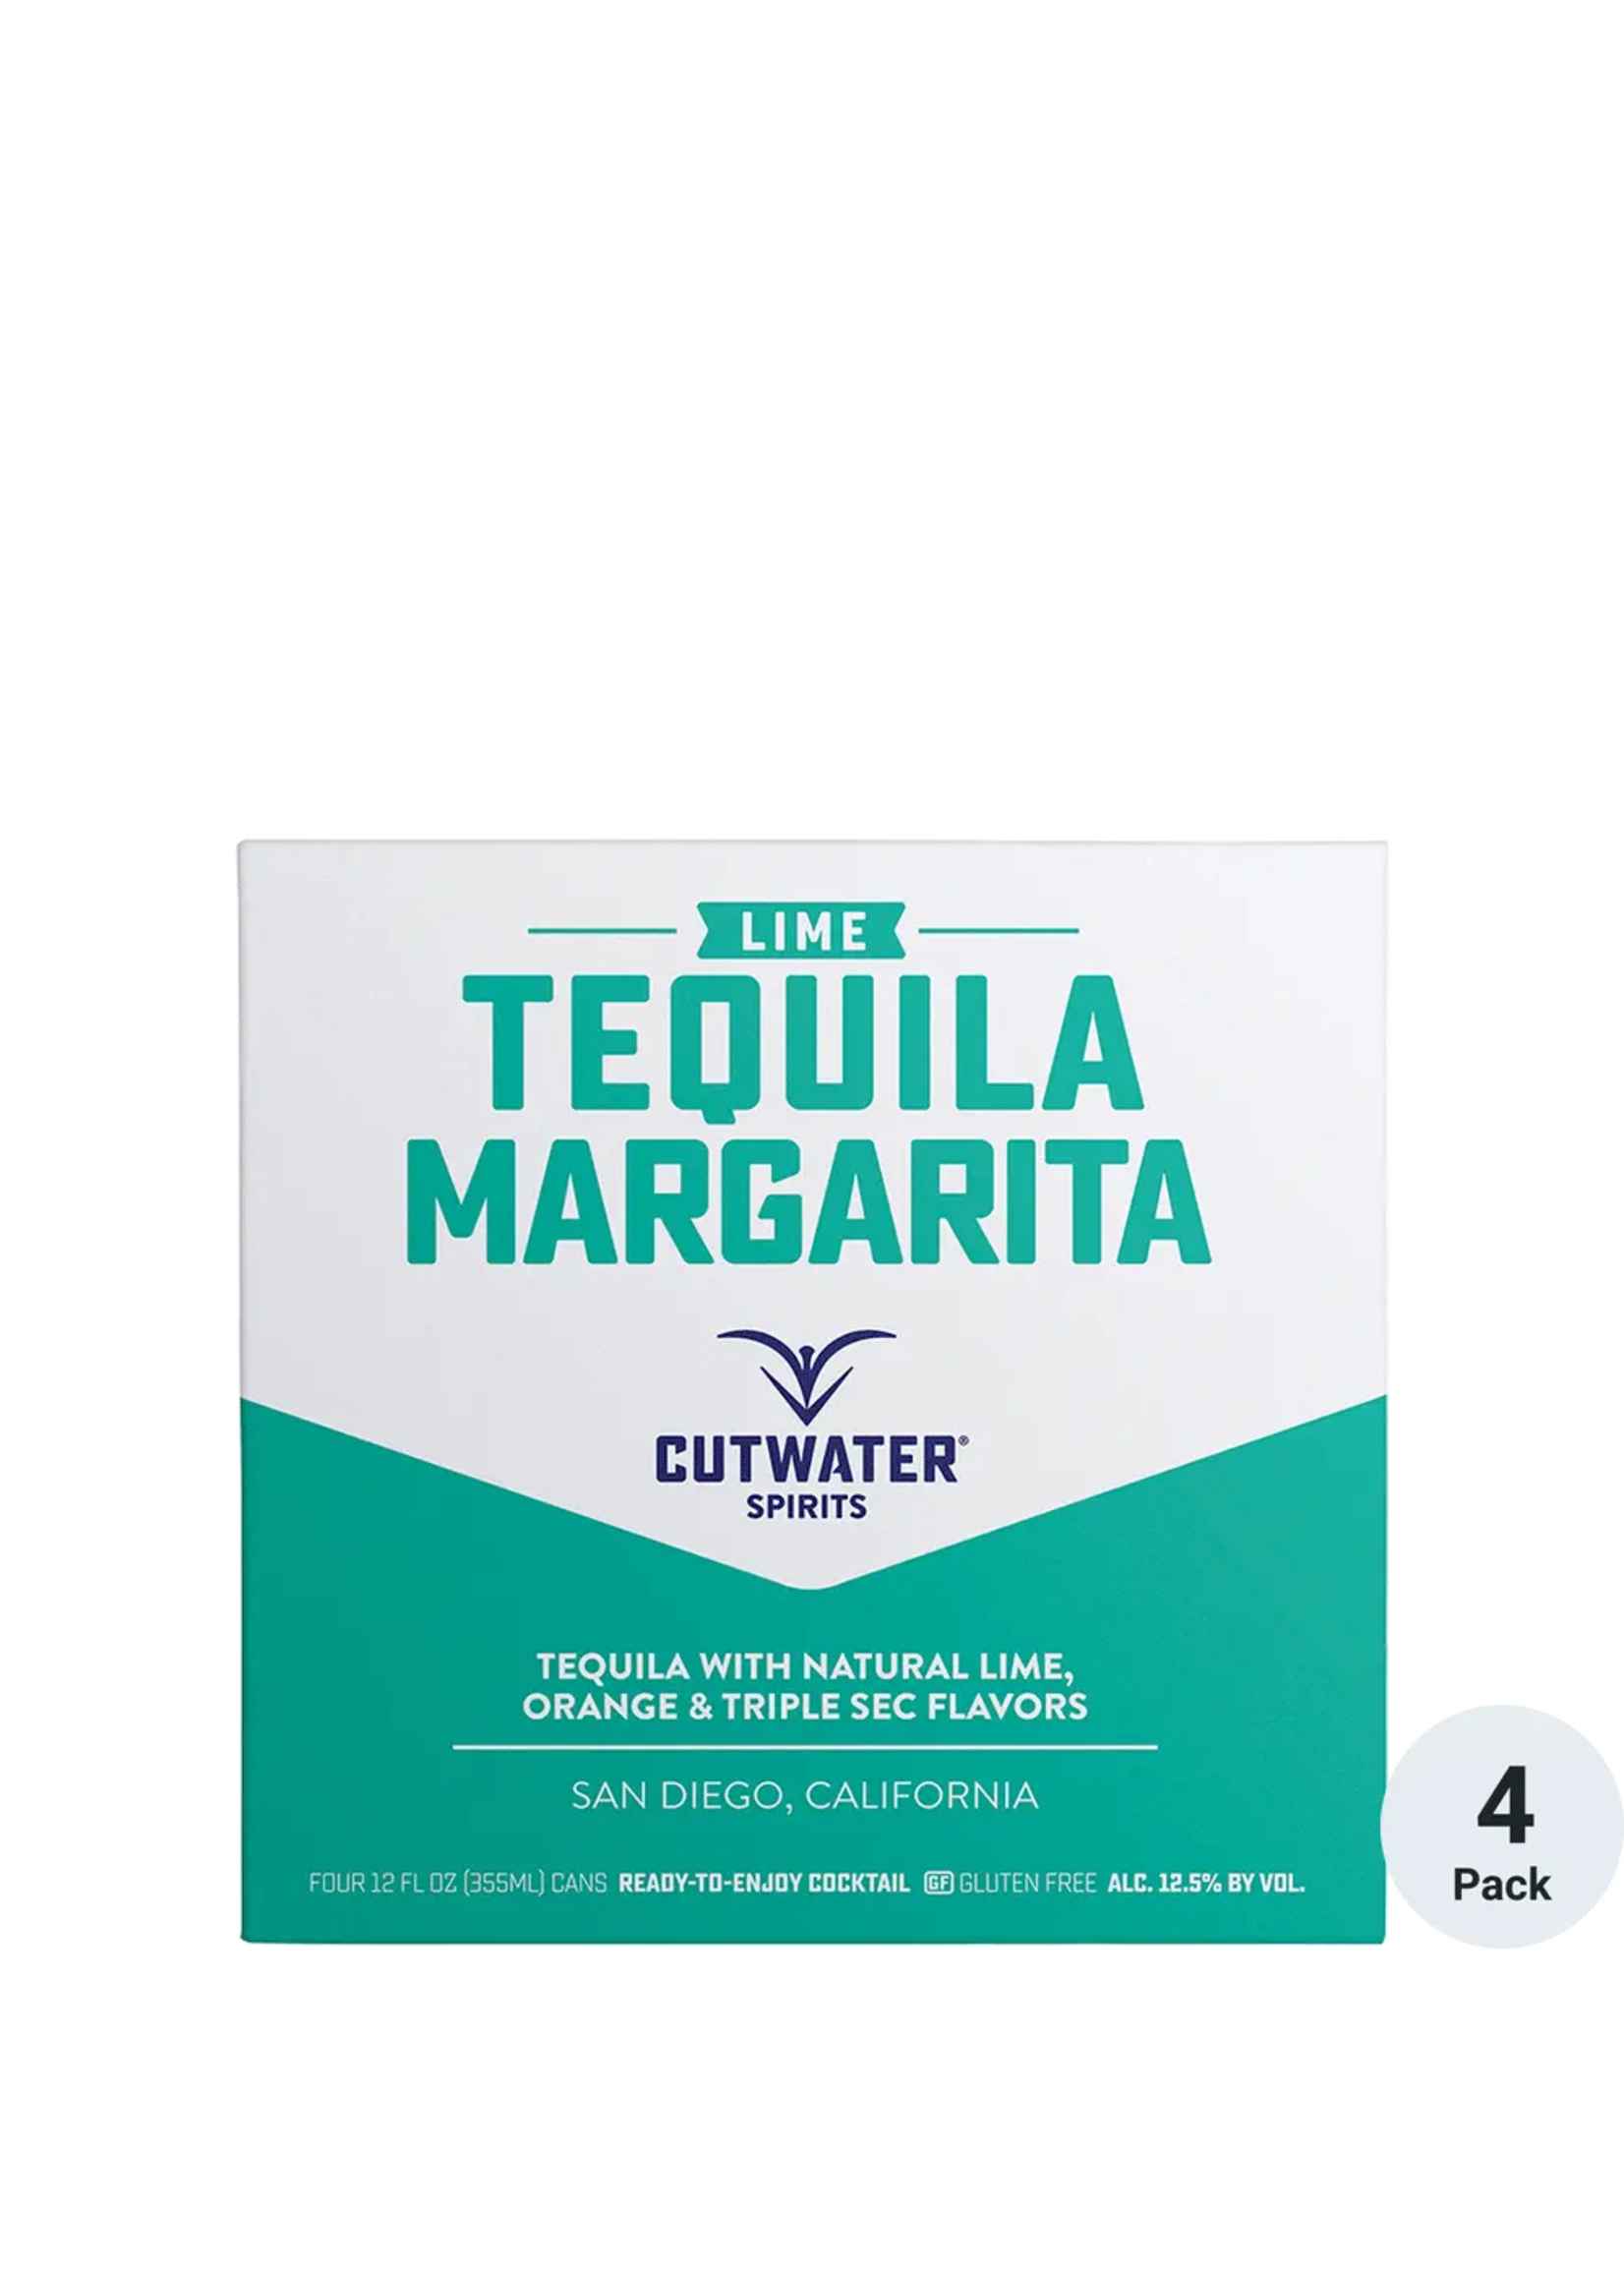 CUTWATER COCKTAIL LIME MARGARITA 25PF 4PK 12OZ CANS